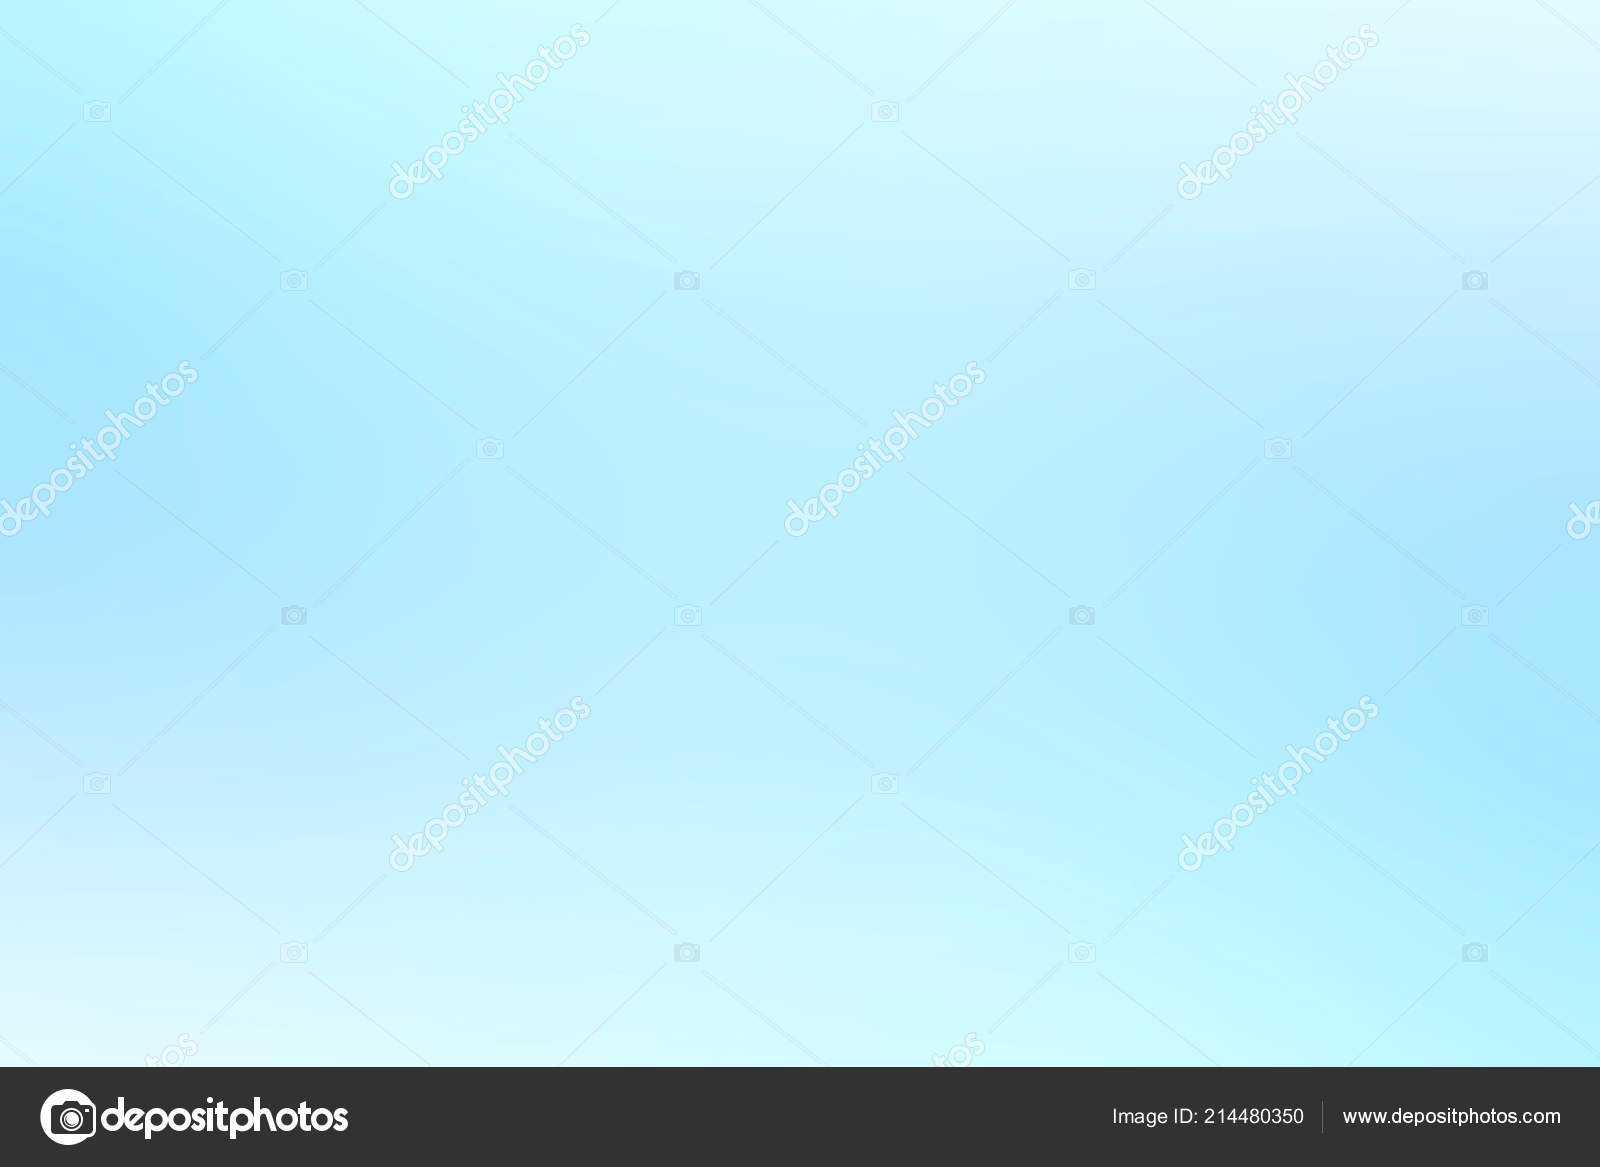 Light effect simple Stock Photos, Royalty Free Light effect simple Images |  Depositphotos